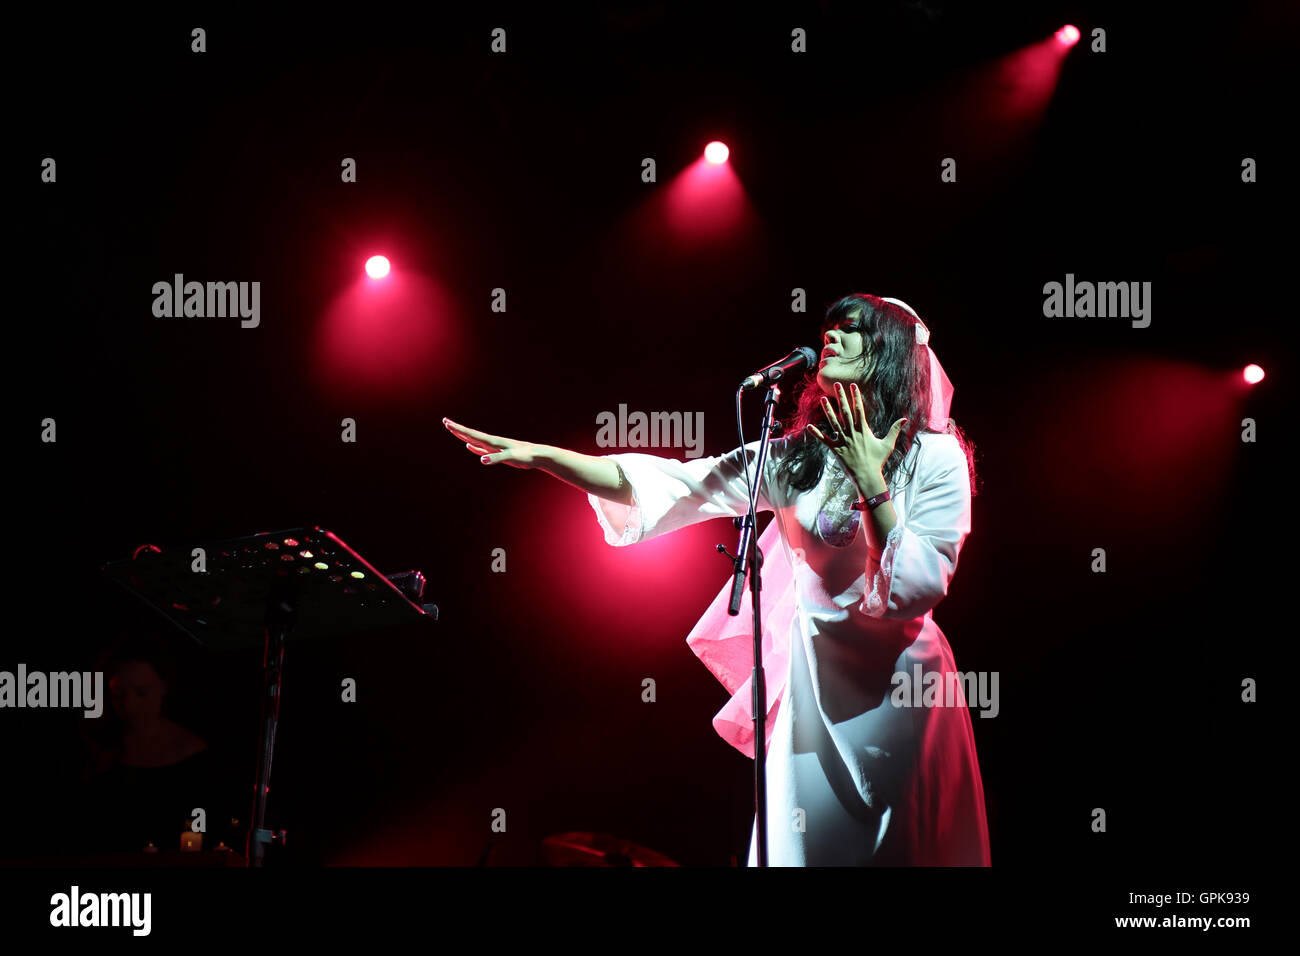 Larmer Tree Gardens, Dorset, UK. 3rd September, 2016. Bat for Lashes (real name Natasha Khan) performing on the Woods Stage on day 3 of the 2016 End of the Road Festival in Larmer Tree Gardens in Dorset. Picture date: Saturday September 3, 2016. Photo credit: Roger Garfield/Alamy Live News Stock Photo